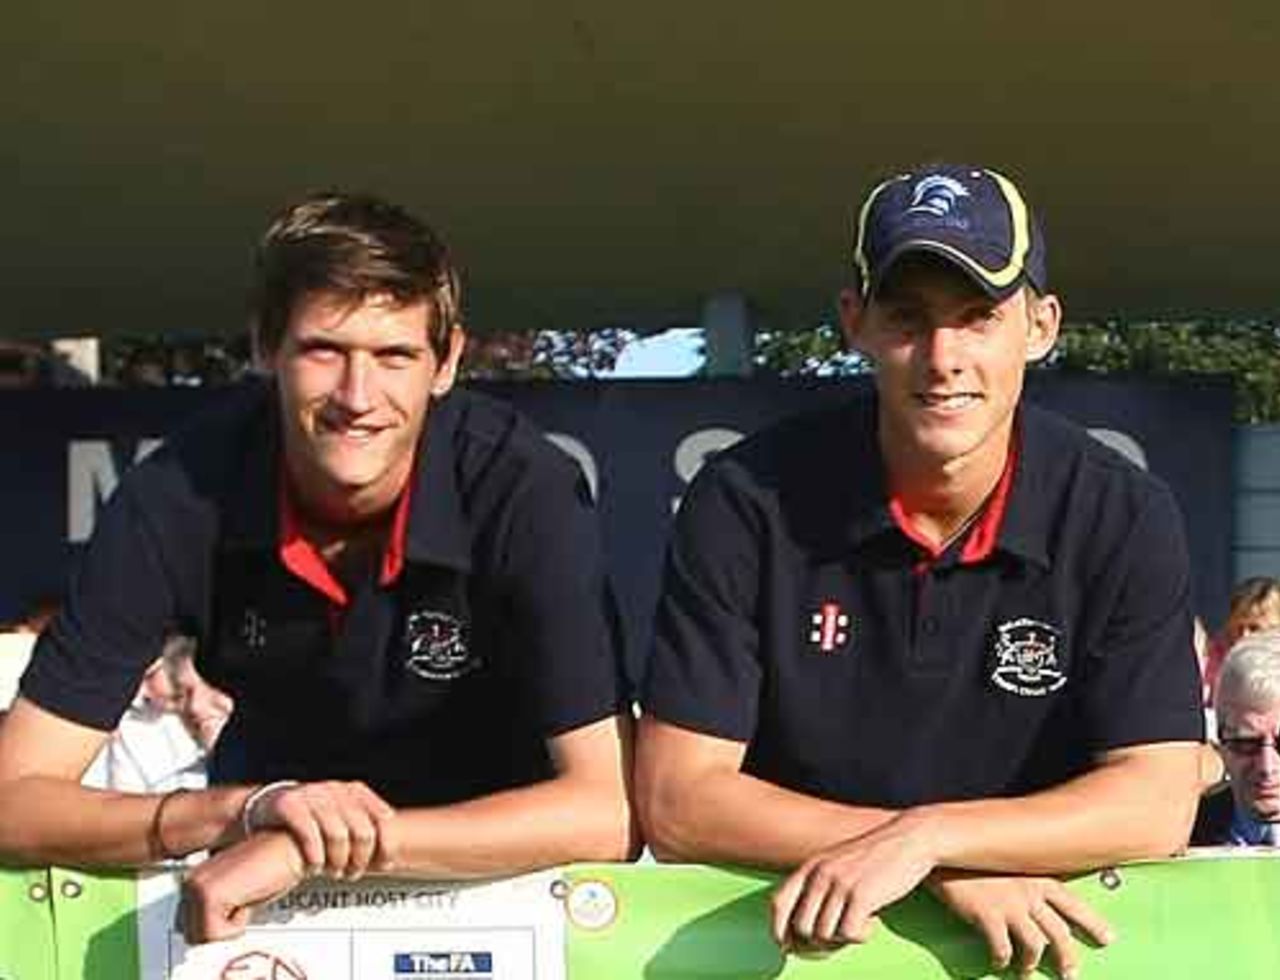 David Payne (l) and Chris Dent (r) as they sign professional contracts, Bristol, August 18, 2009